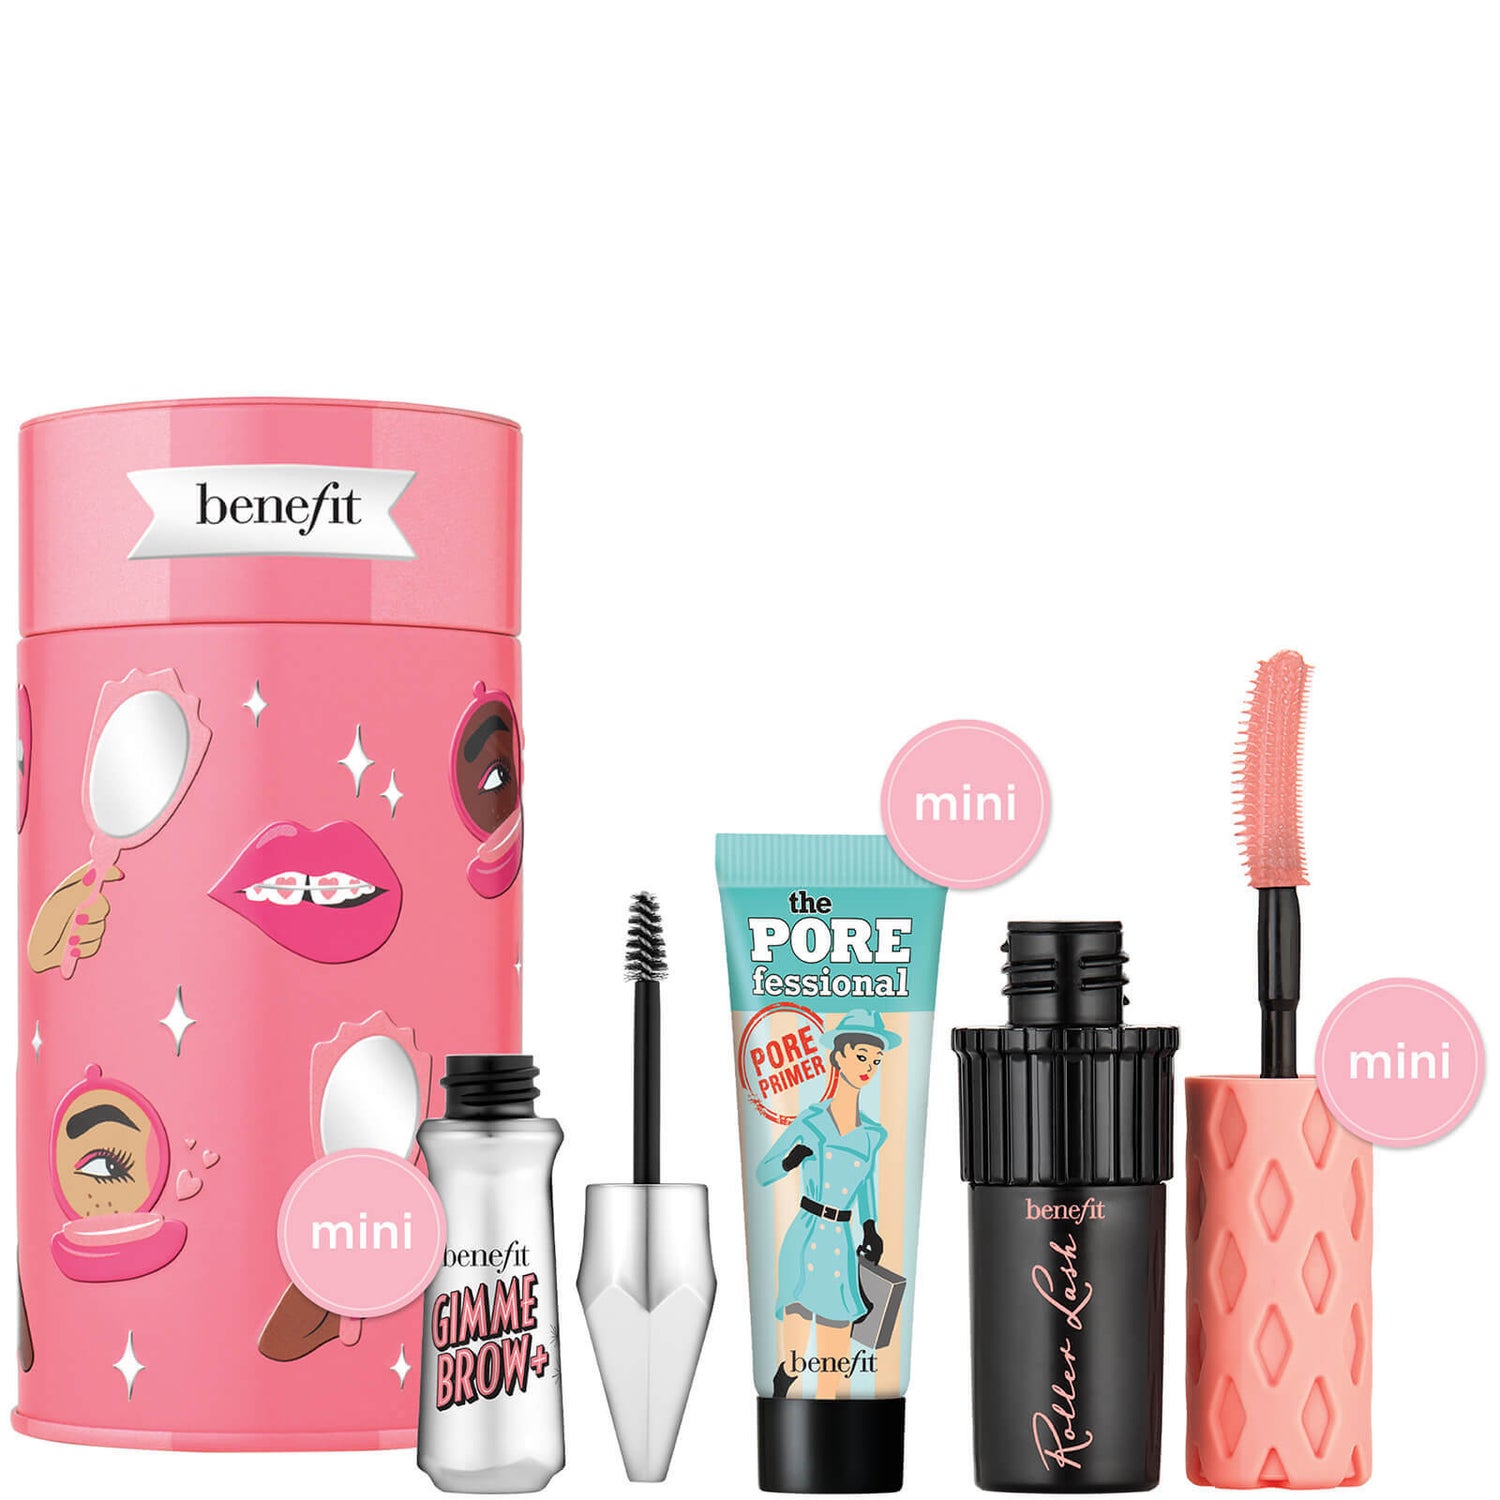 benefit Beauty Thrills Brow, Mascara and Primer Gift Set